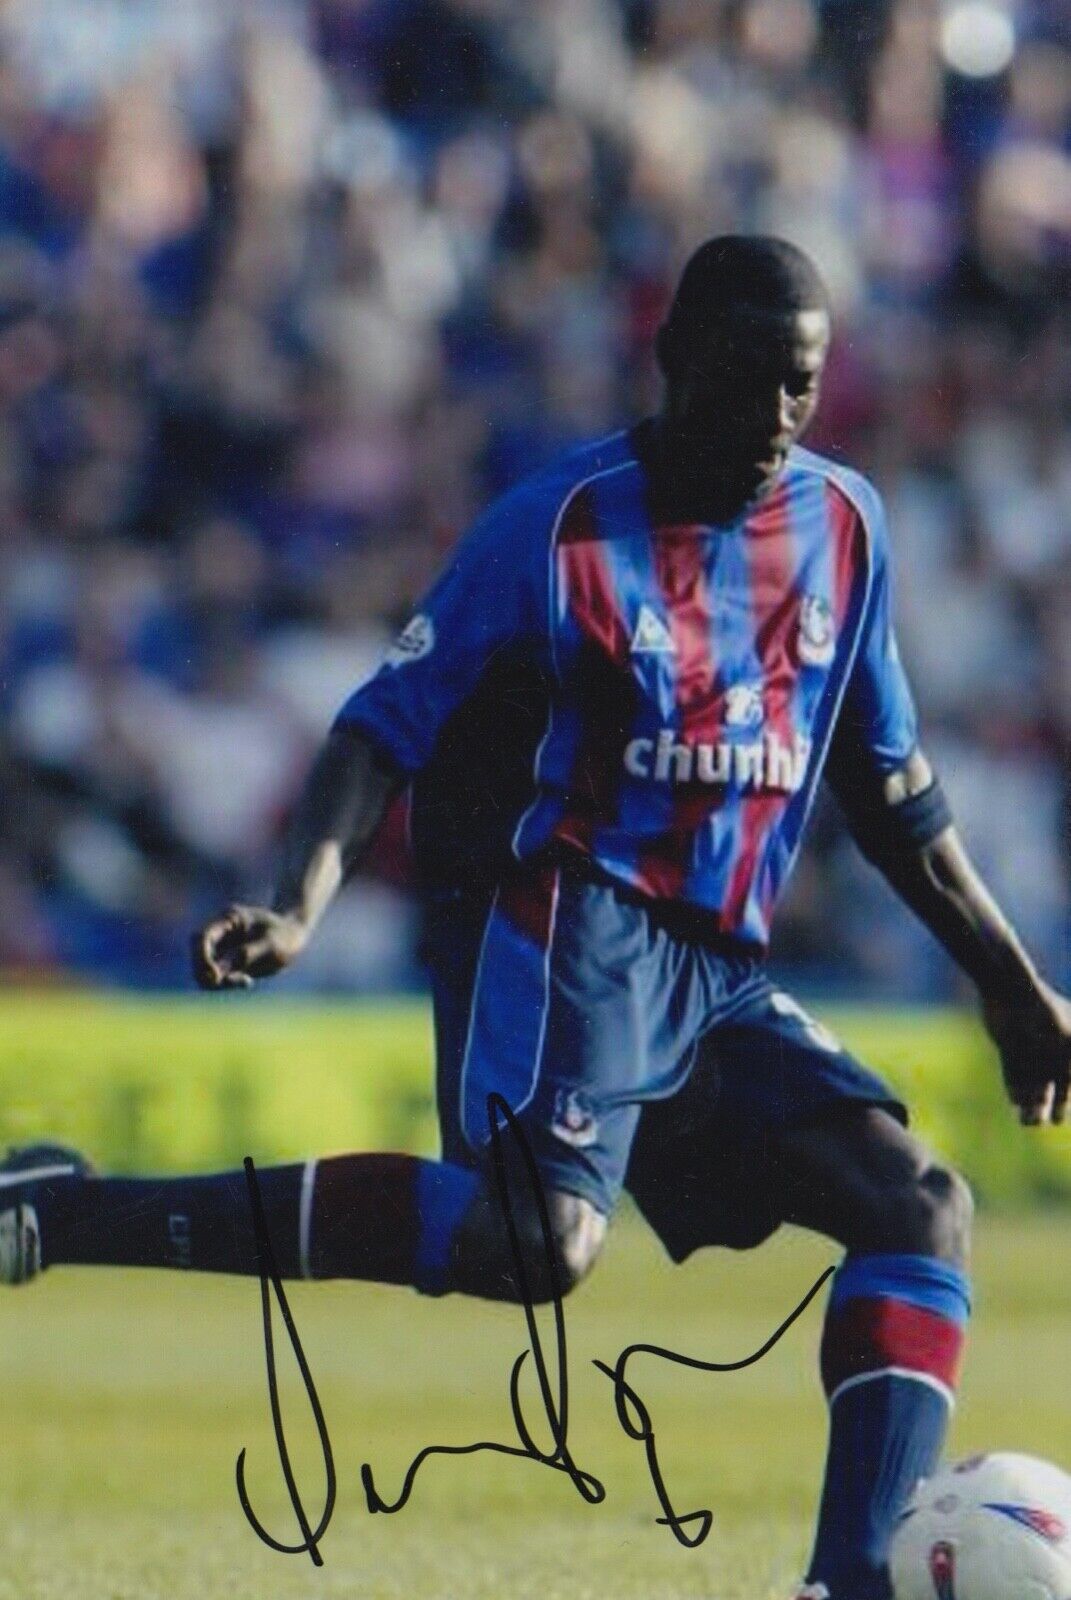 DARREN POWELL HAND SIGNED 6X4 Photo Poster painting - FOOTBALL AUTOGRAPH - CRYSTAL PALACE.